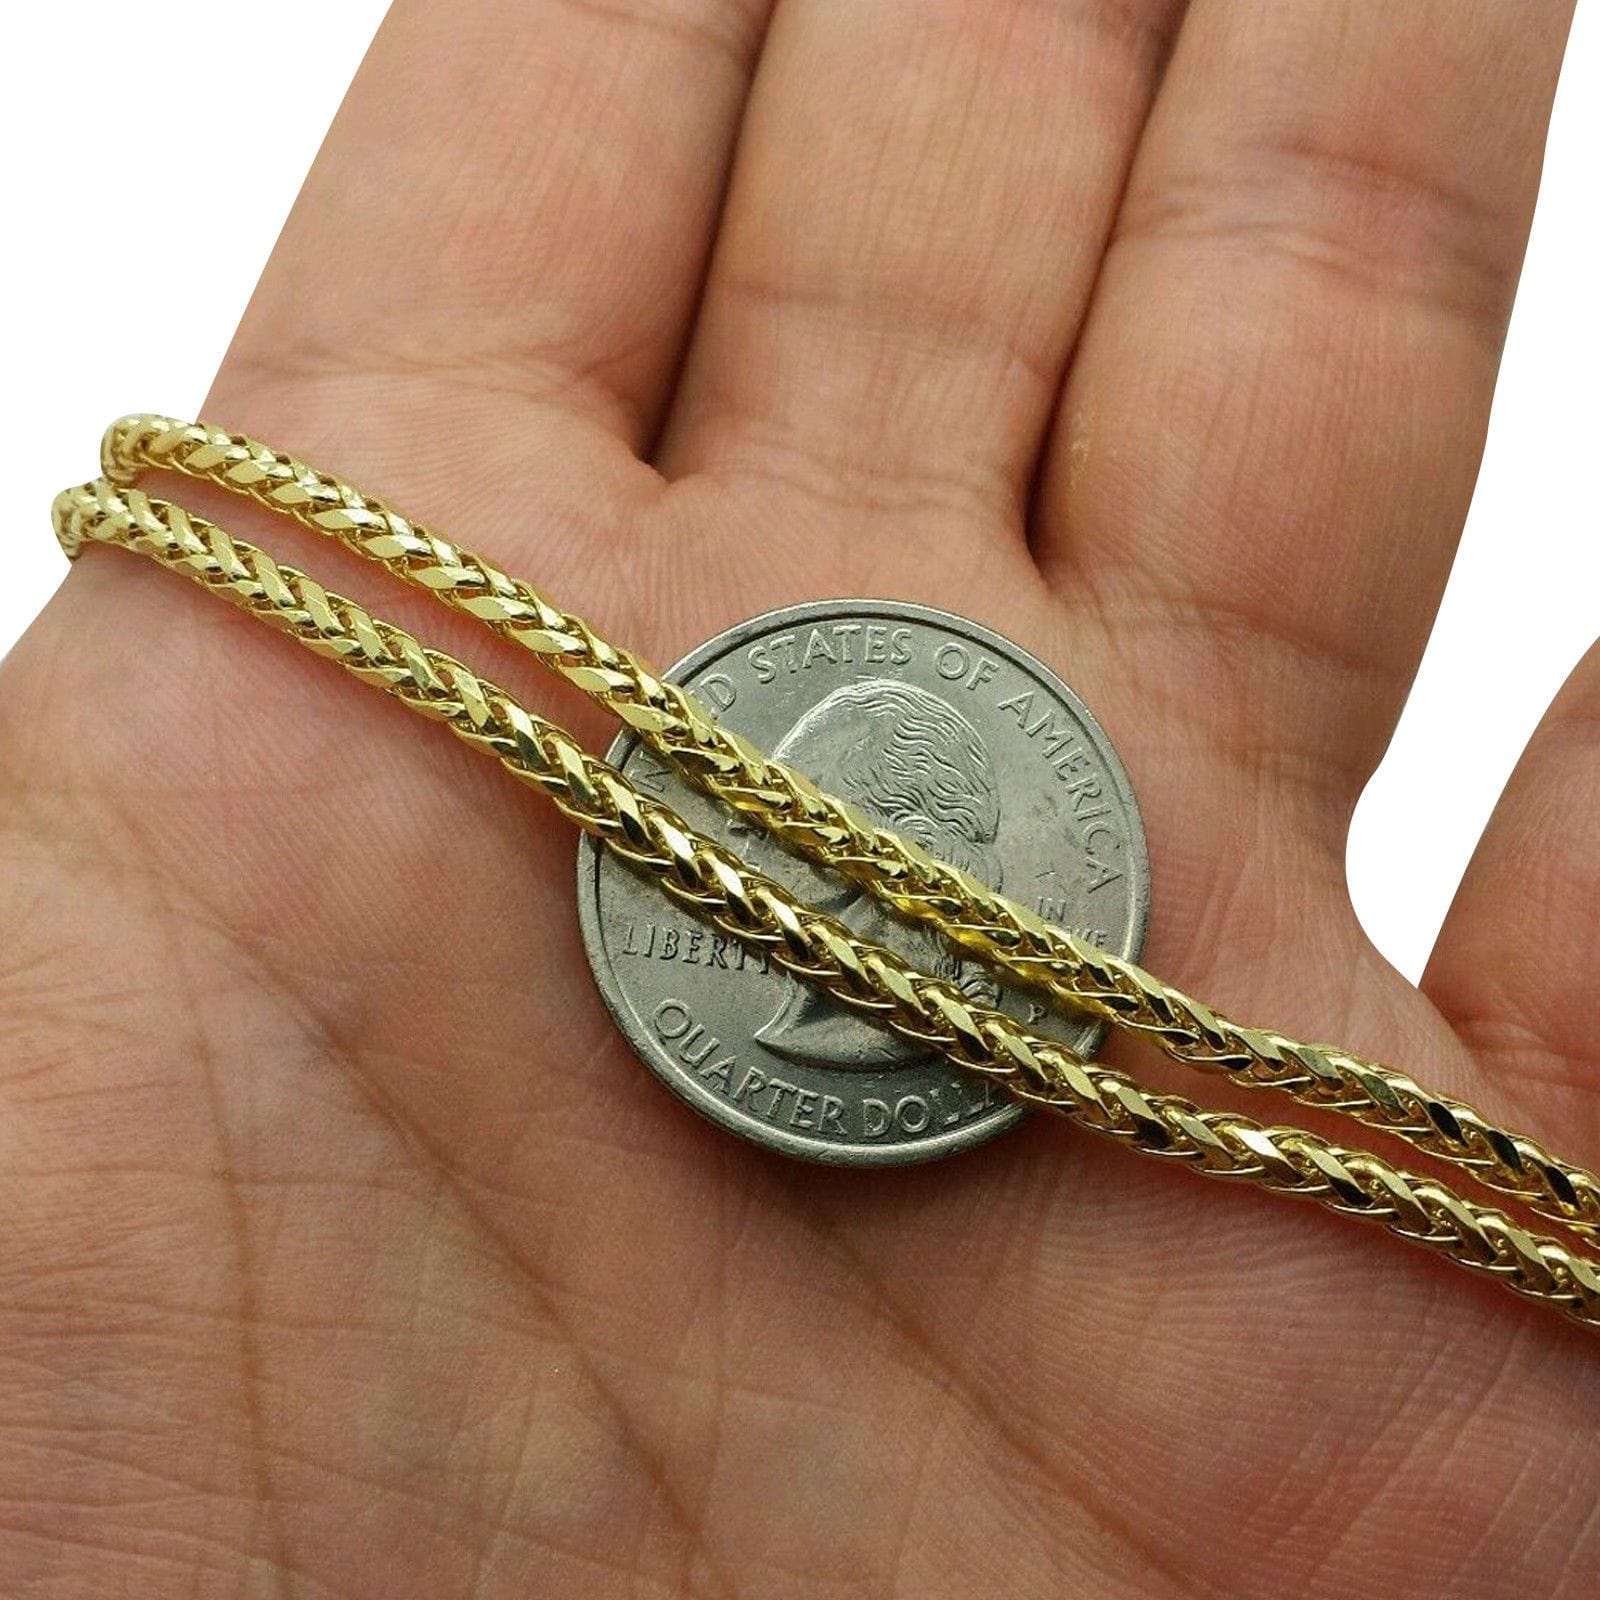 3mm gold franco chain on hand